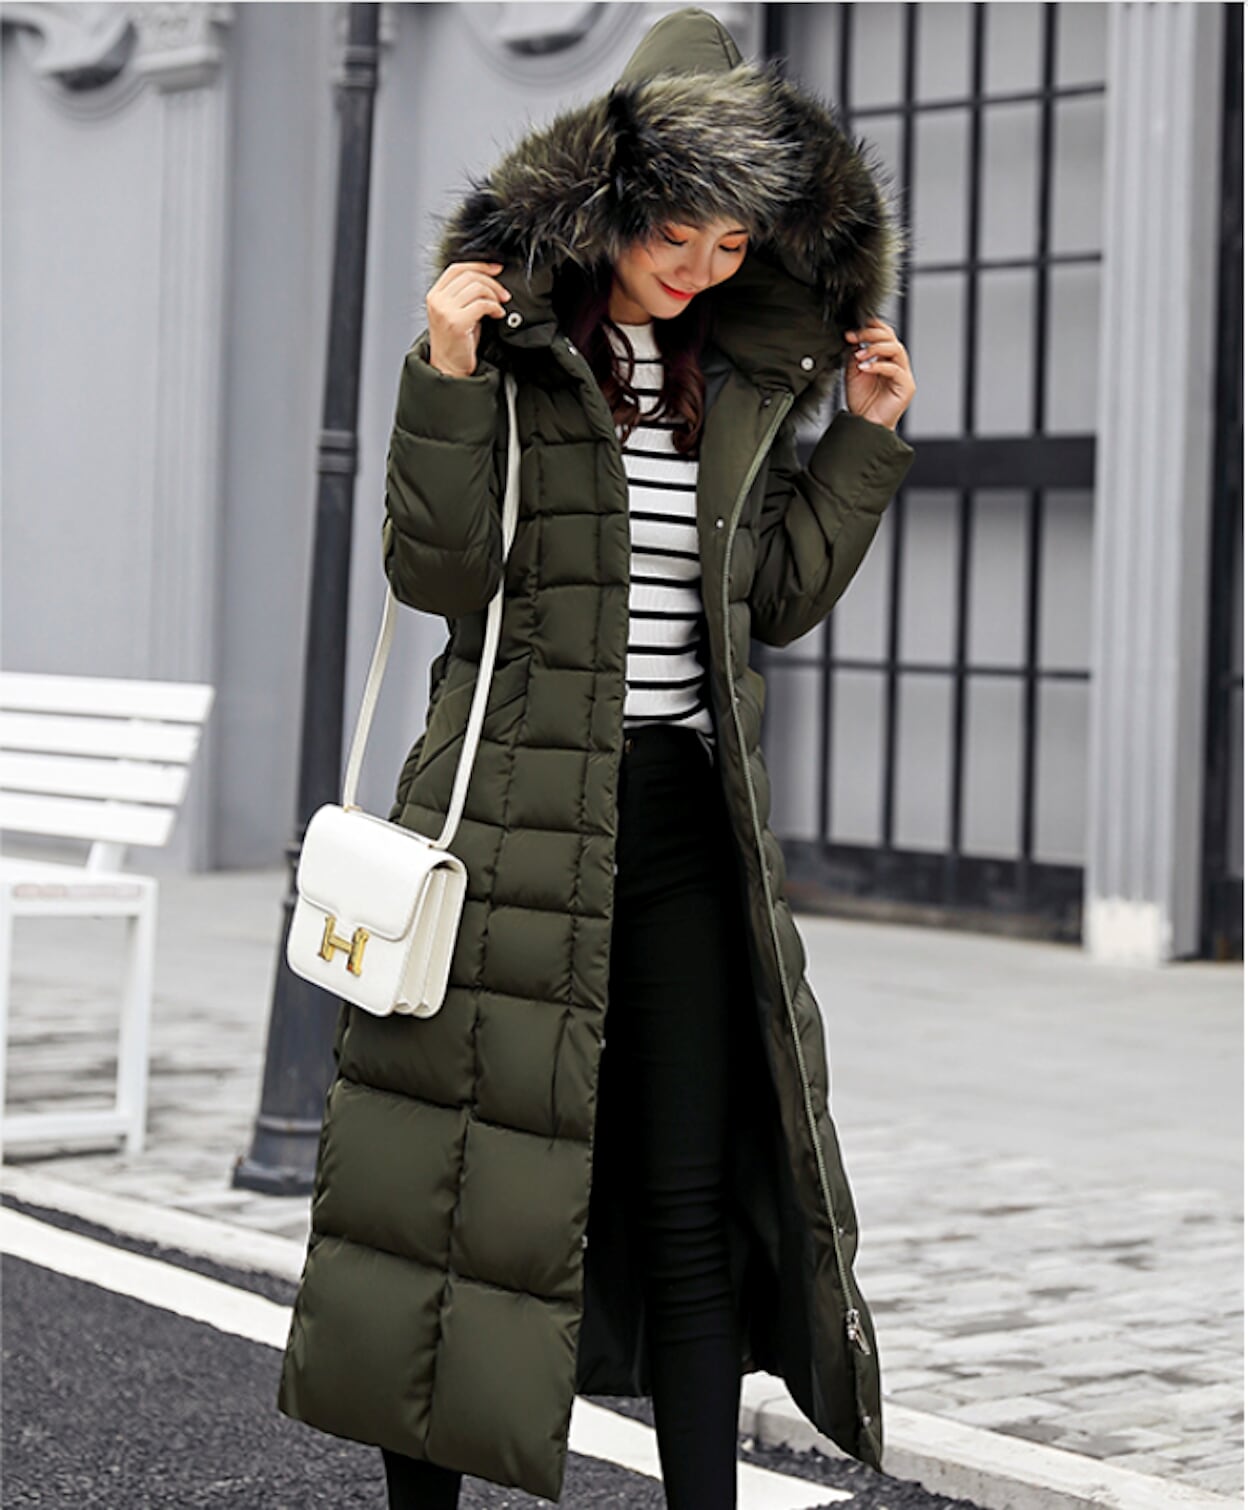 Womens Hooded Long Coat with Removable Faux Fur Collar